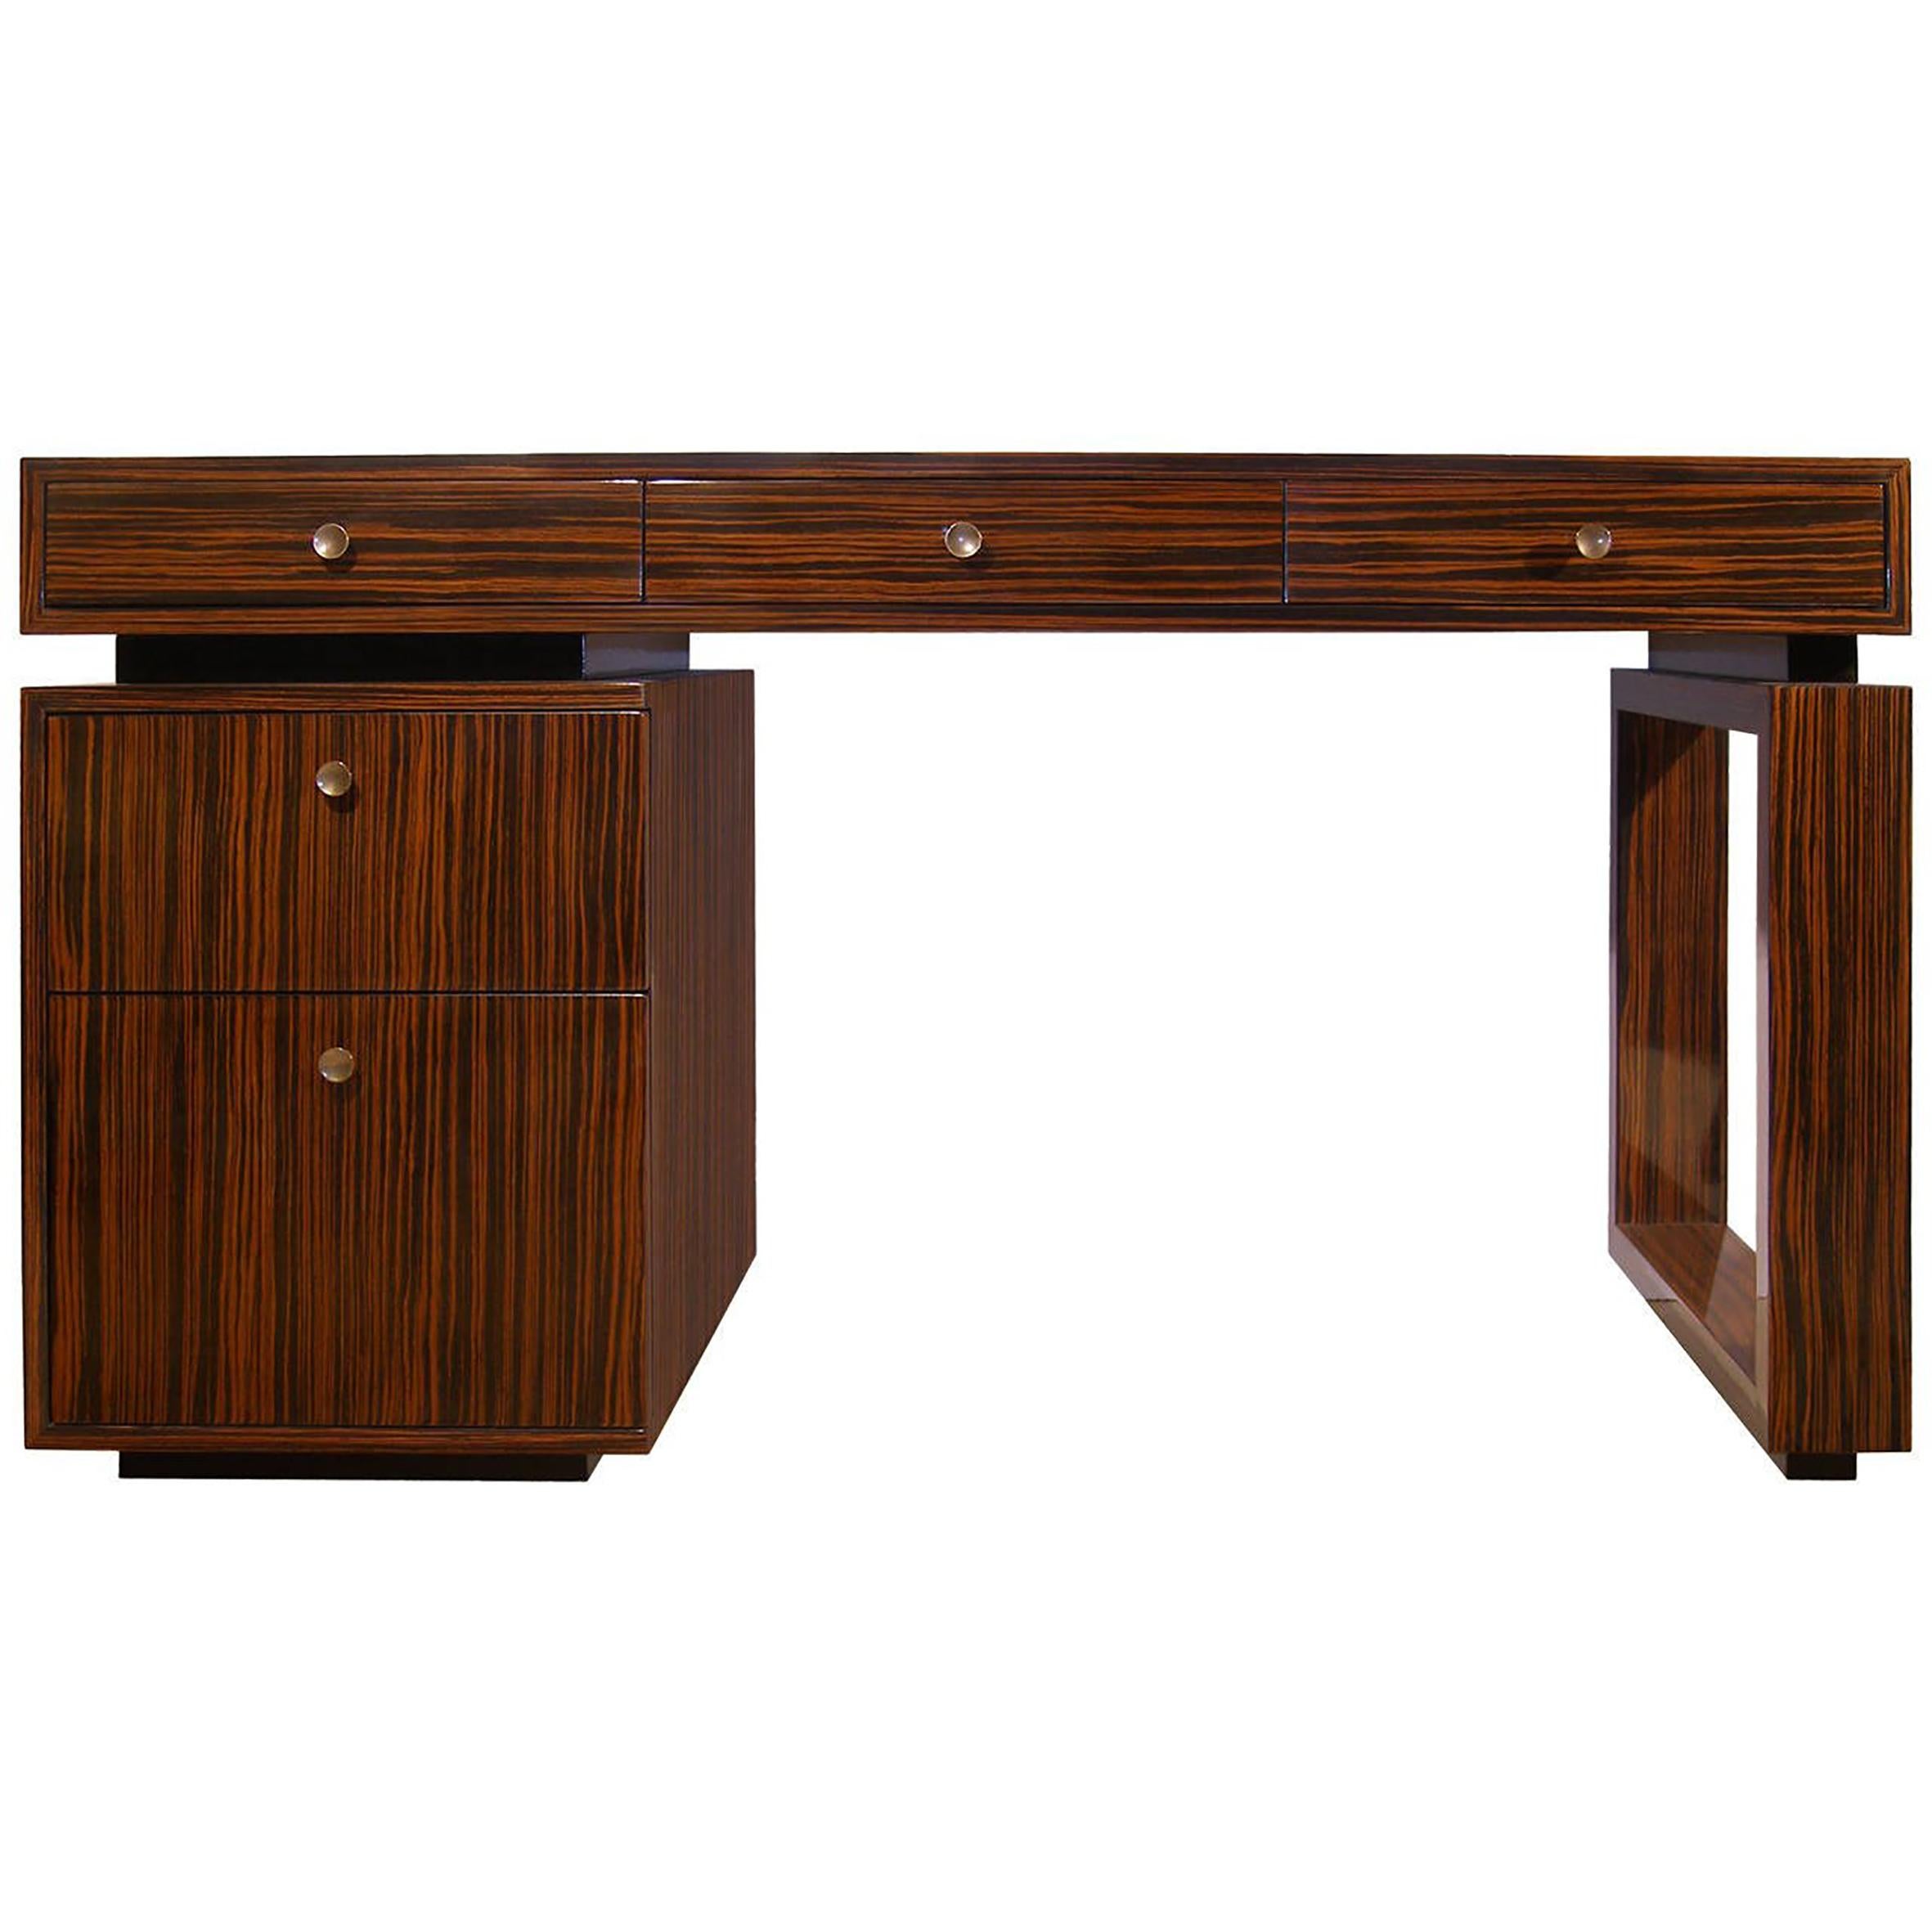 A macassar ebony desk with antique bronze pulls designed by  Craig Van Den Brulle.

American - Made to Order.

Lead time 14 -16 Weeks

Custom Sizing, Finishes And Woods Are Available.